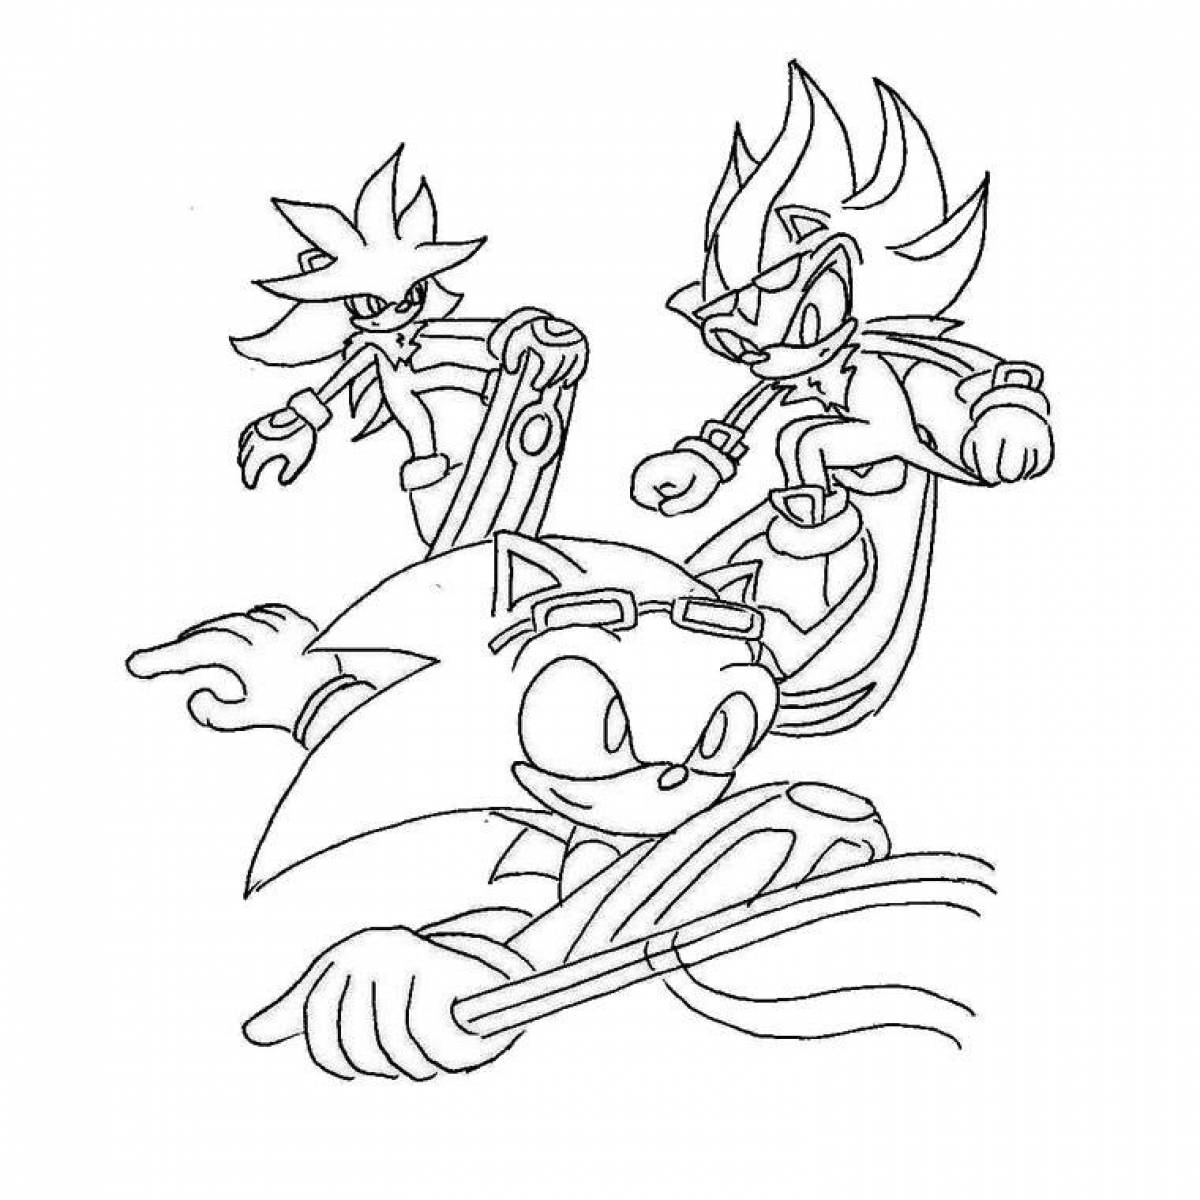 Intriguing sonic shadow coloring book